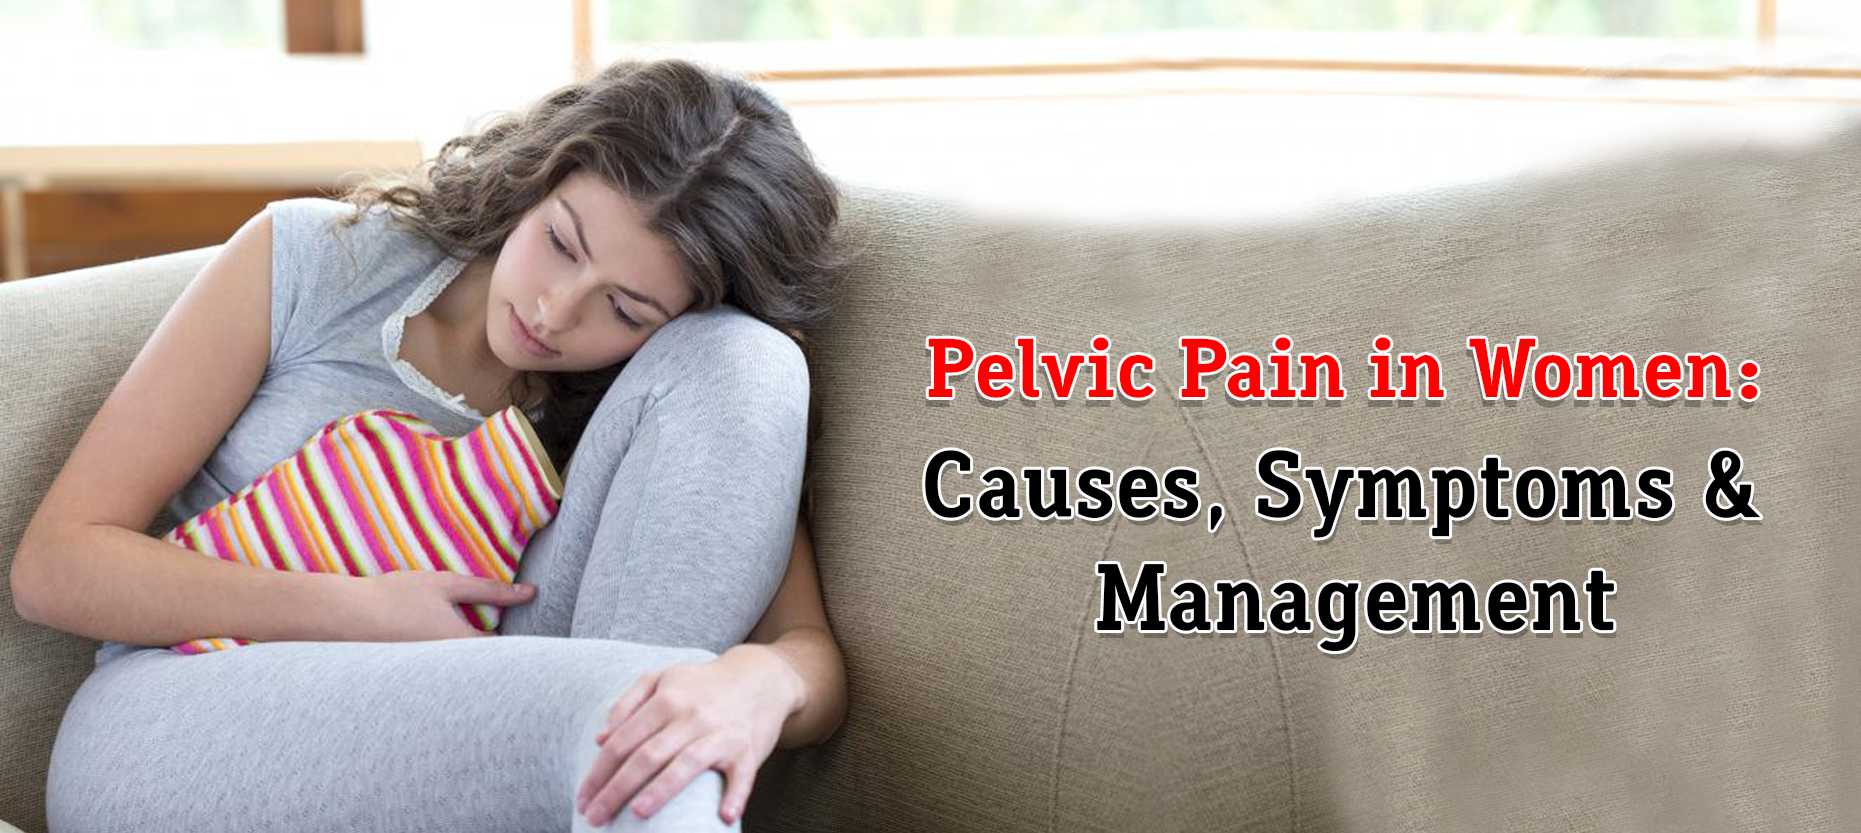 Pelvic pain in women: Causes and symptoms